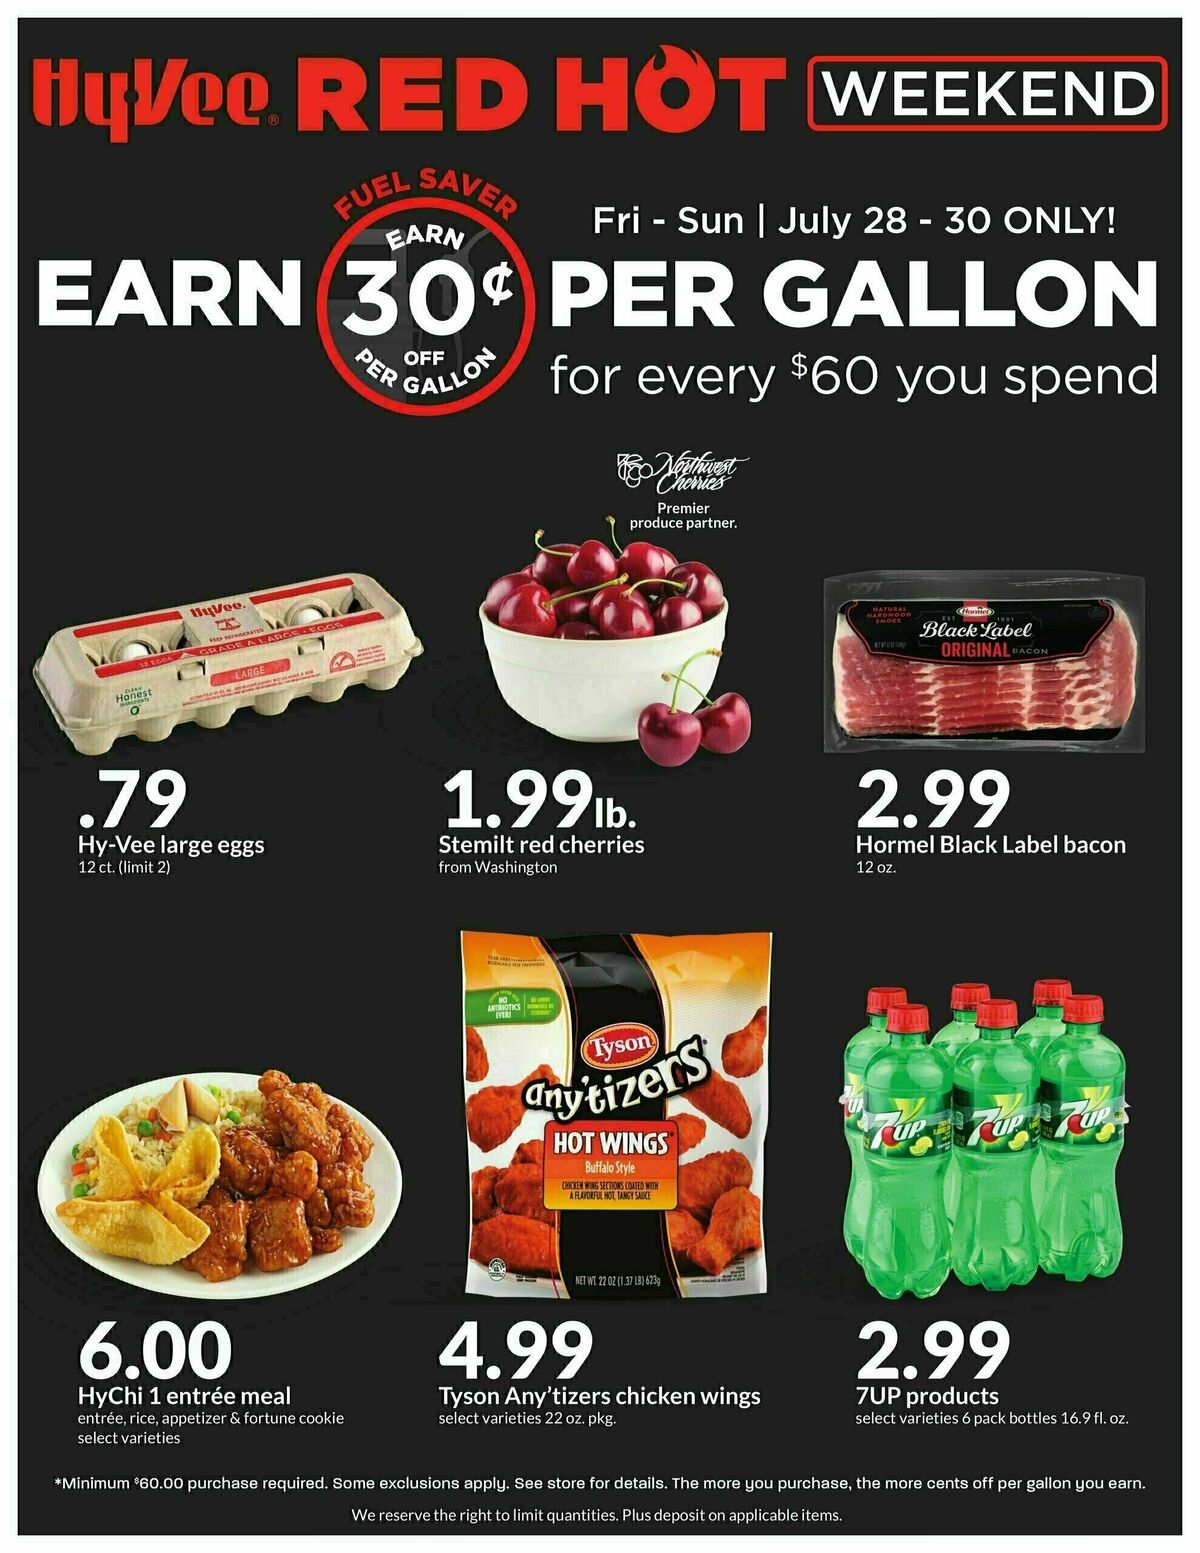 HyVee Red Hot Weekend Deals & Ads from July 28